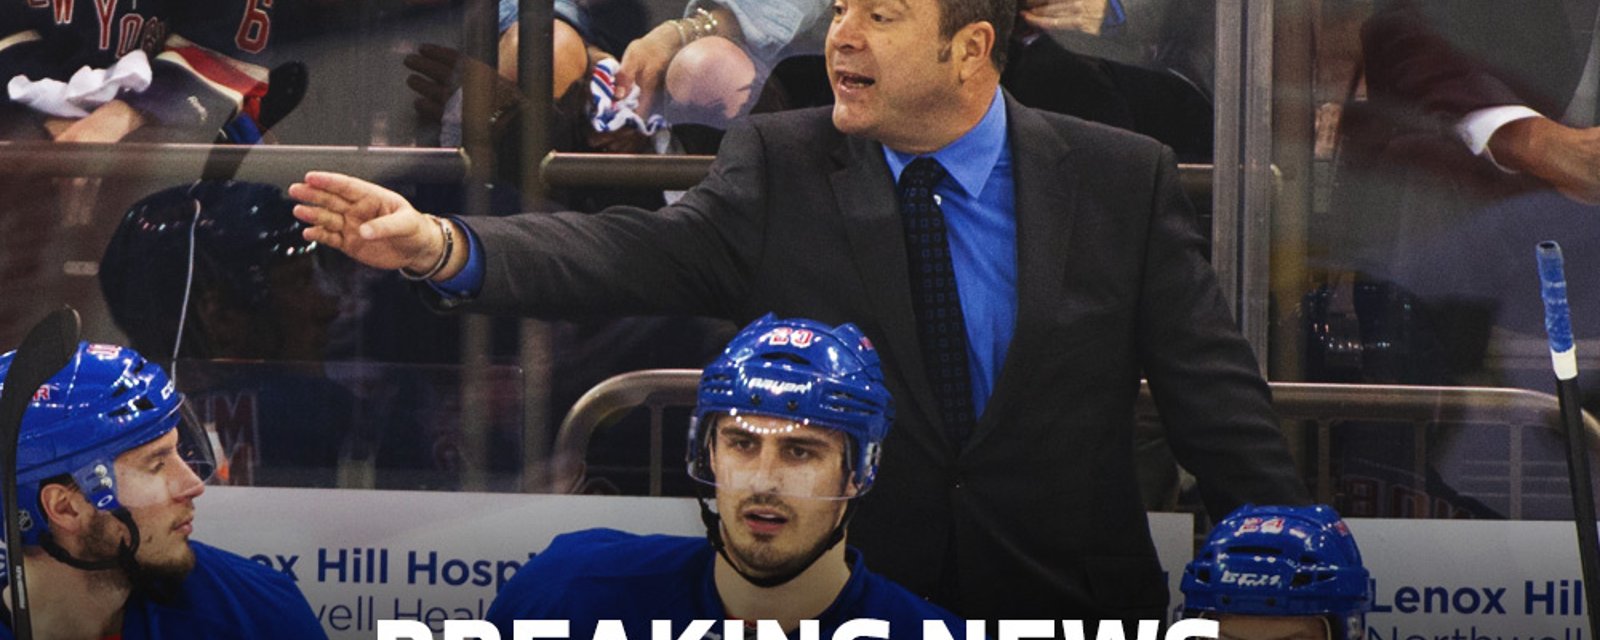 BREAKING: One New York Rangers top D-man expected to be out tonight due to injury.